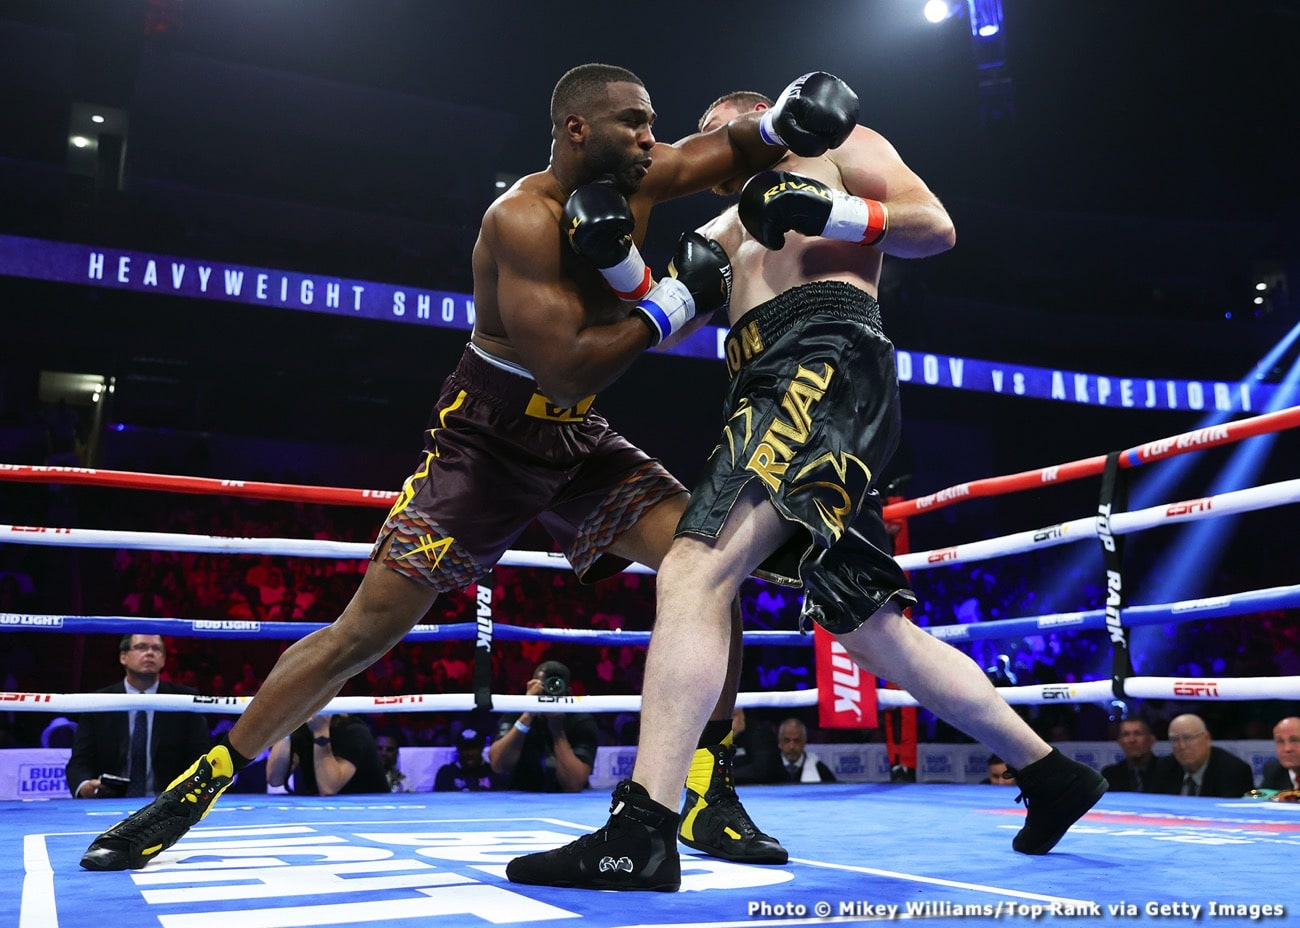 Makhmudov's U.S. Debut Ends with TKO Victory - Boxing Results